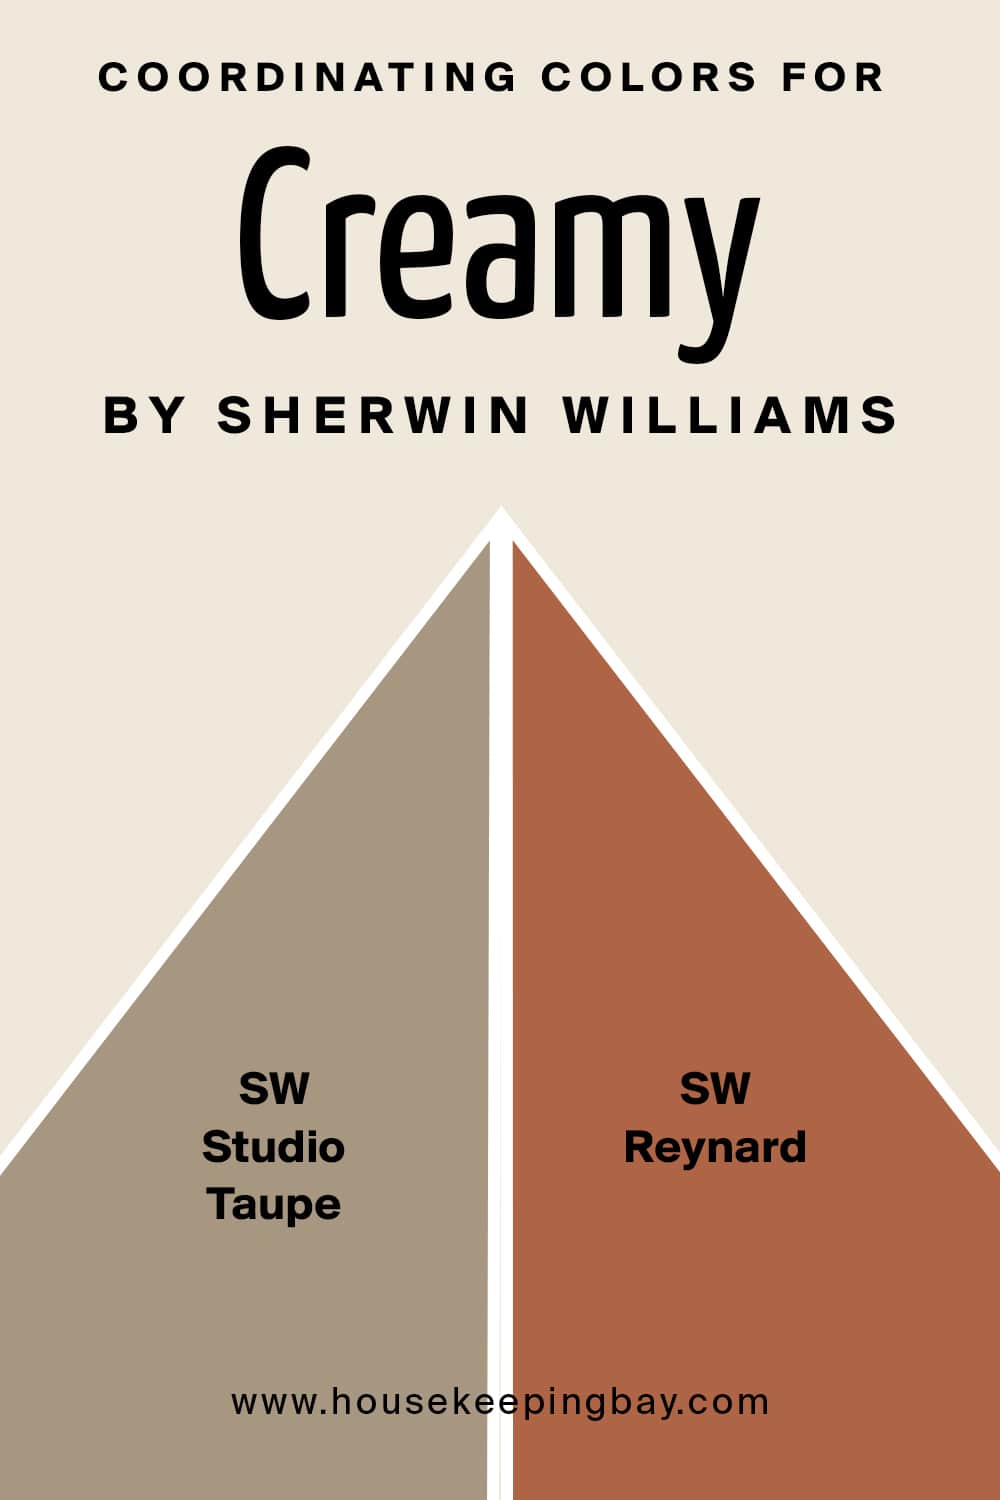 Coordinating Colors for Cream by Sherwin Williams